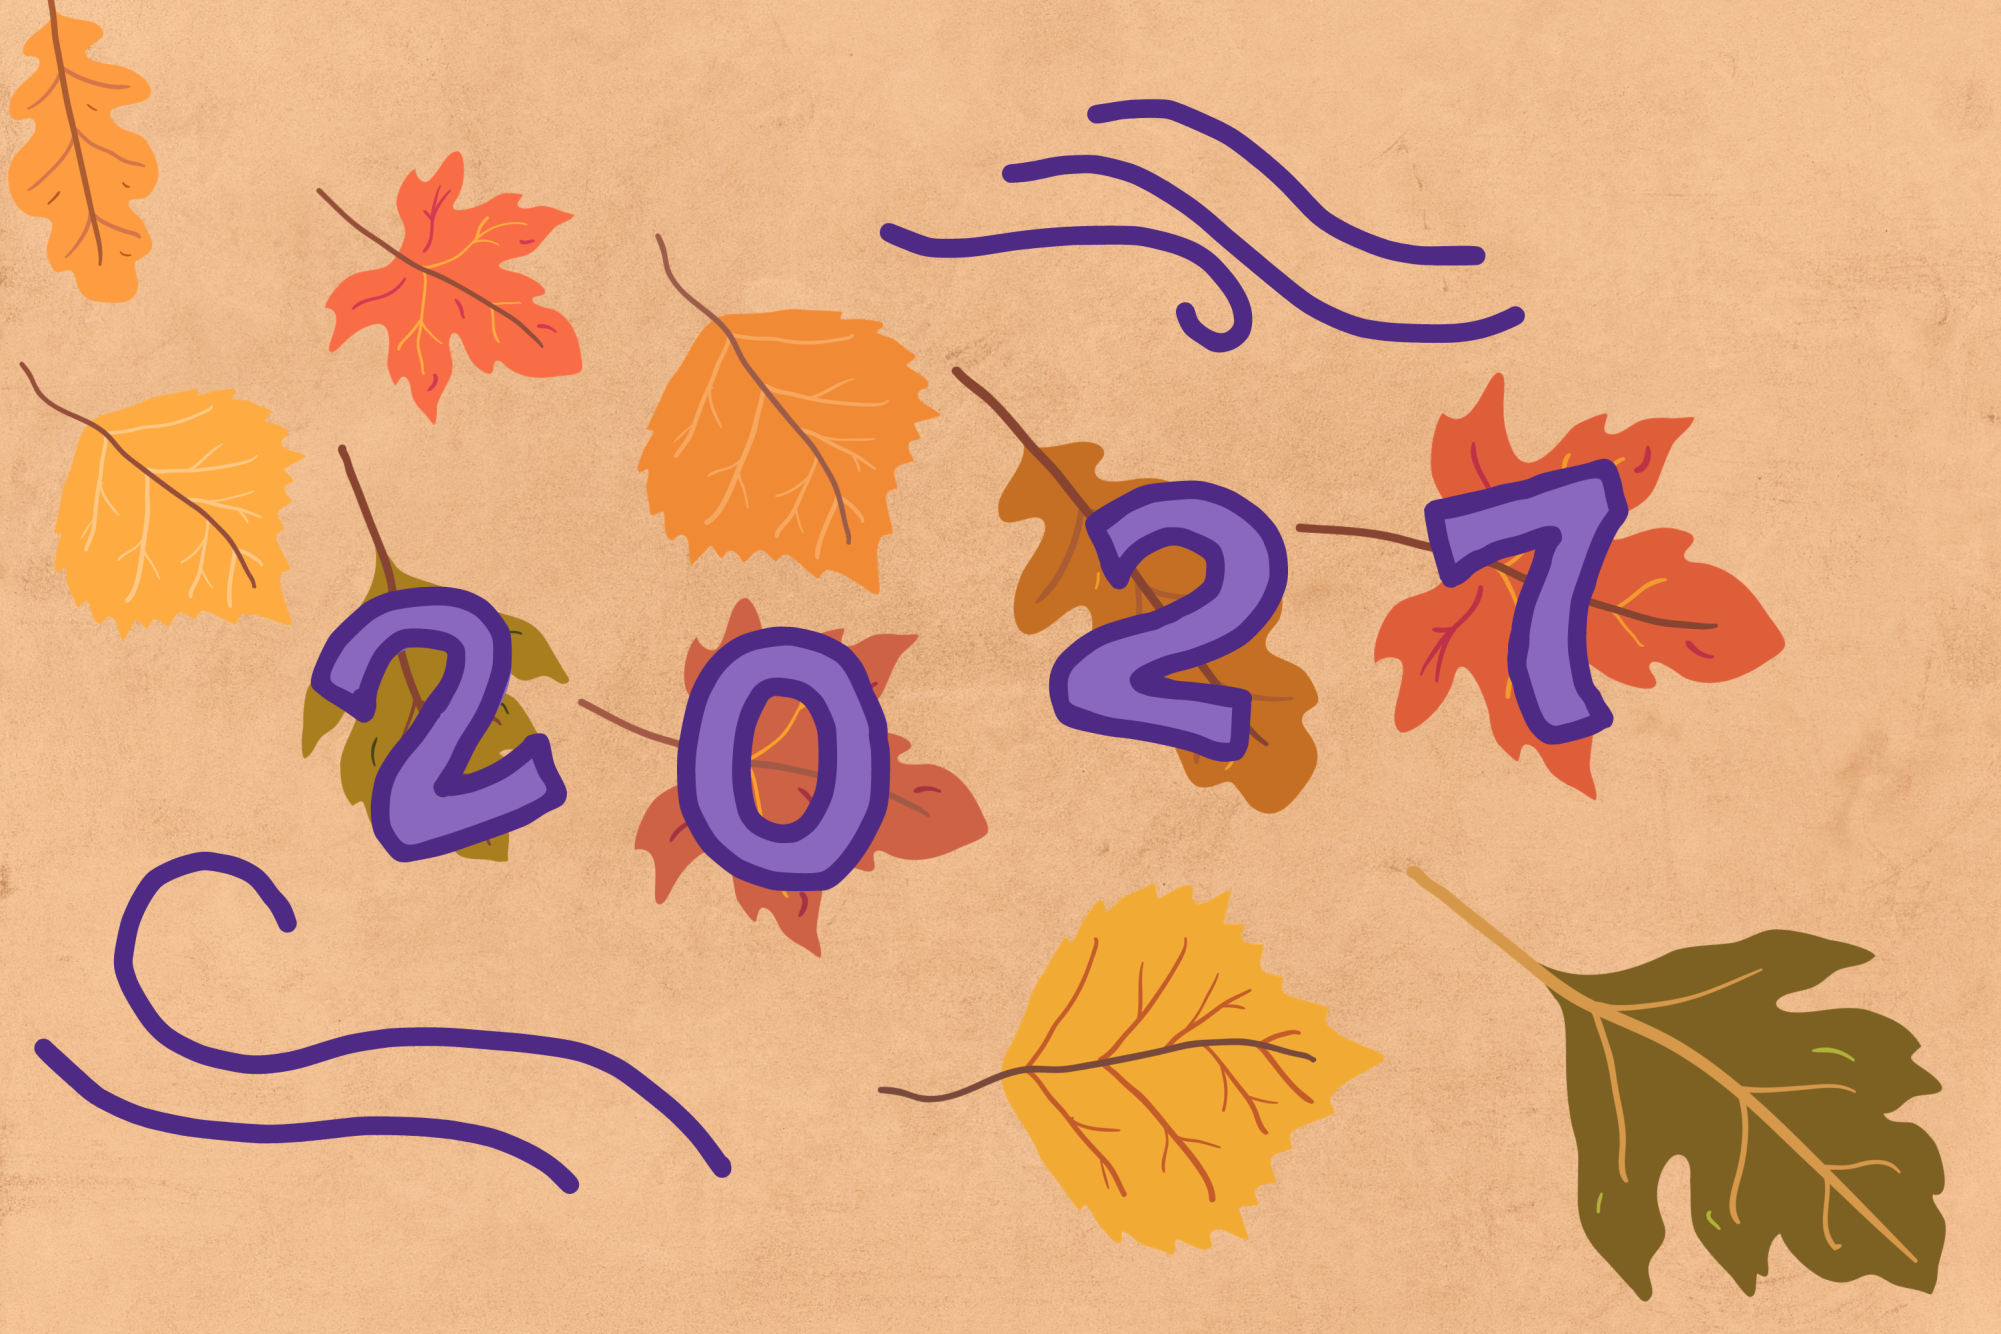 An illustration with ‘2027’ written in purple text with fall leaves behind on a yellow background.